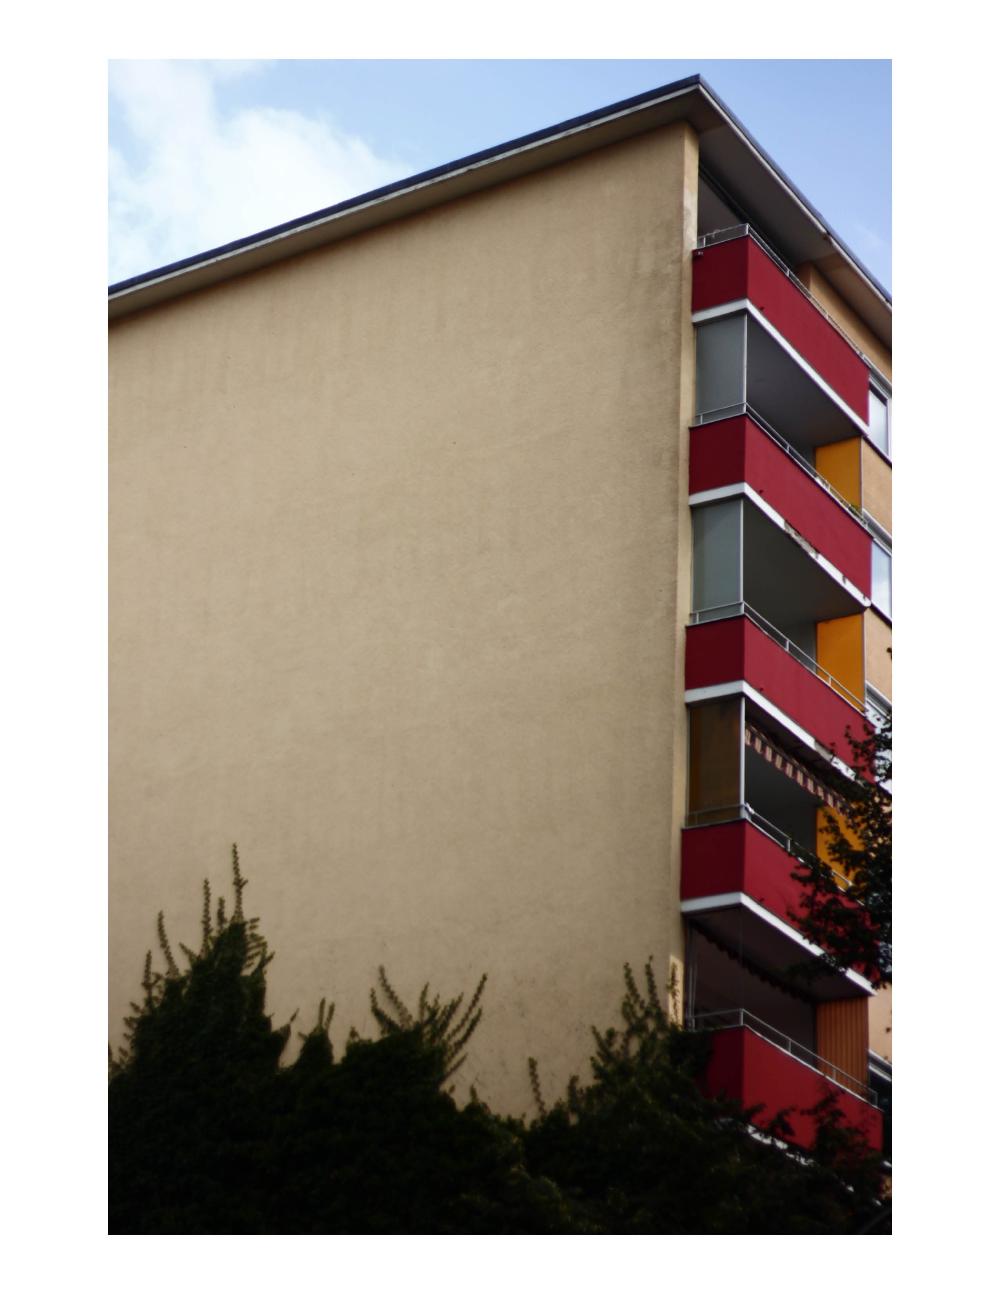 the corner of a building in berlin shows balconies in a stack with a deep red colour slanting down